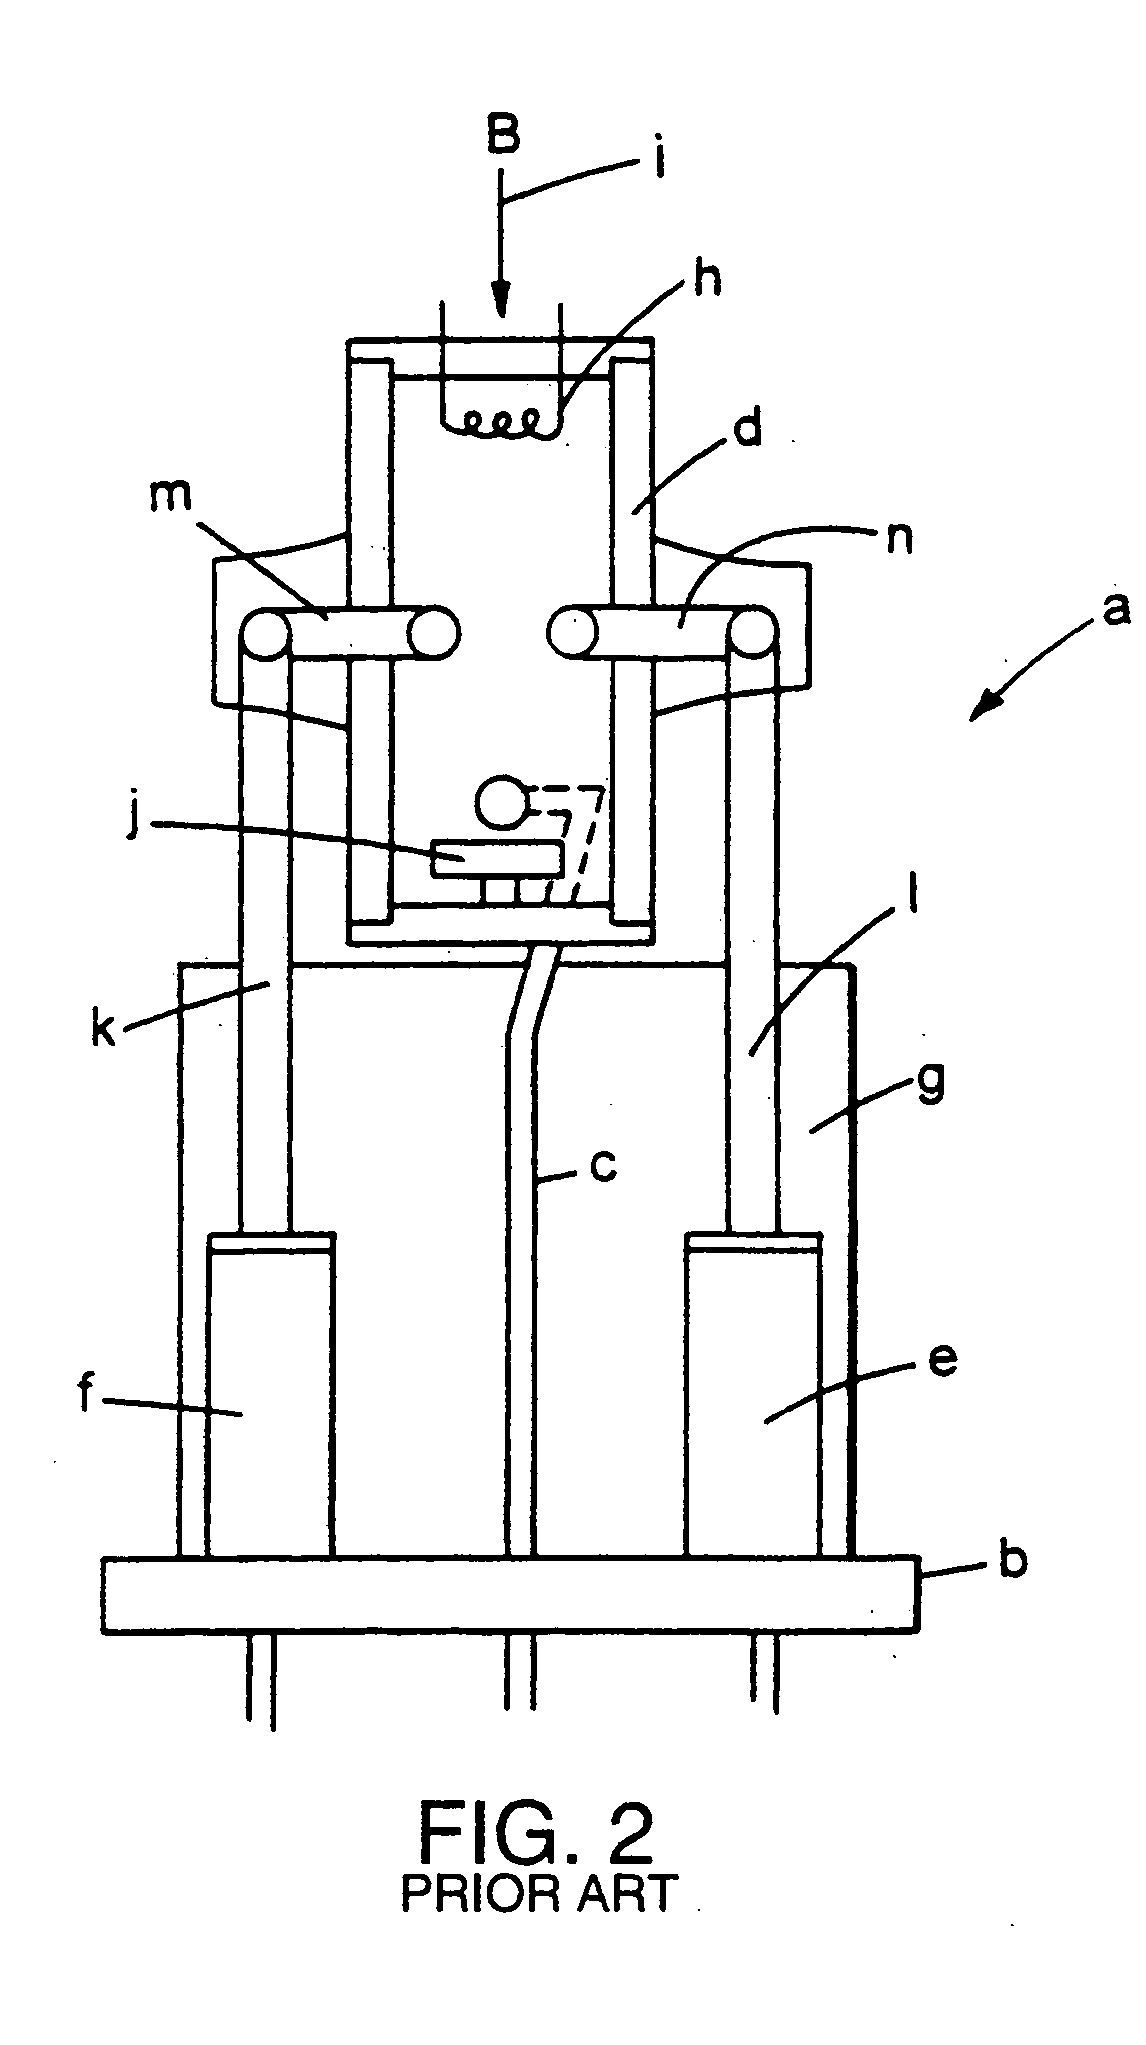 Icon implantation ion source, system and method